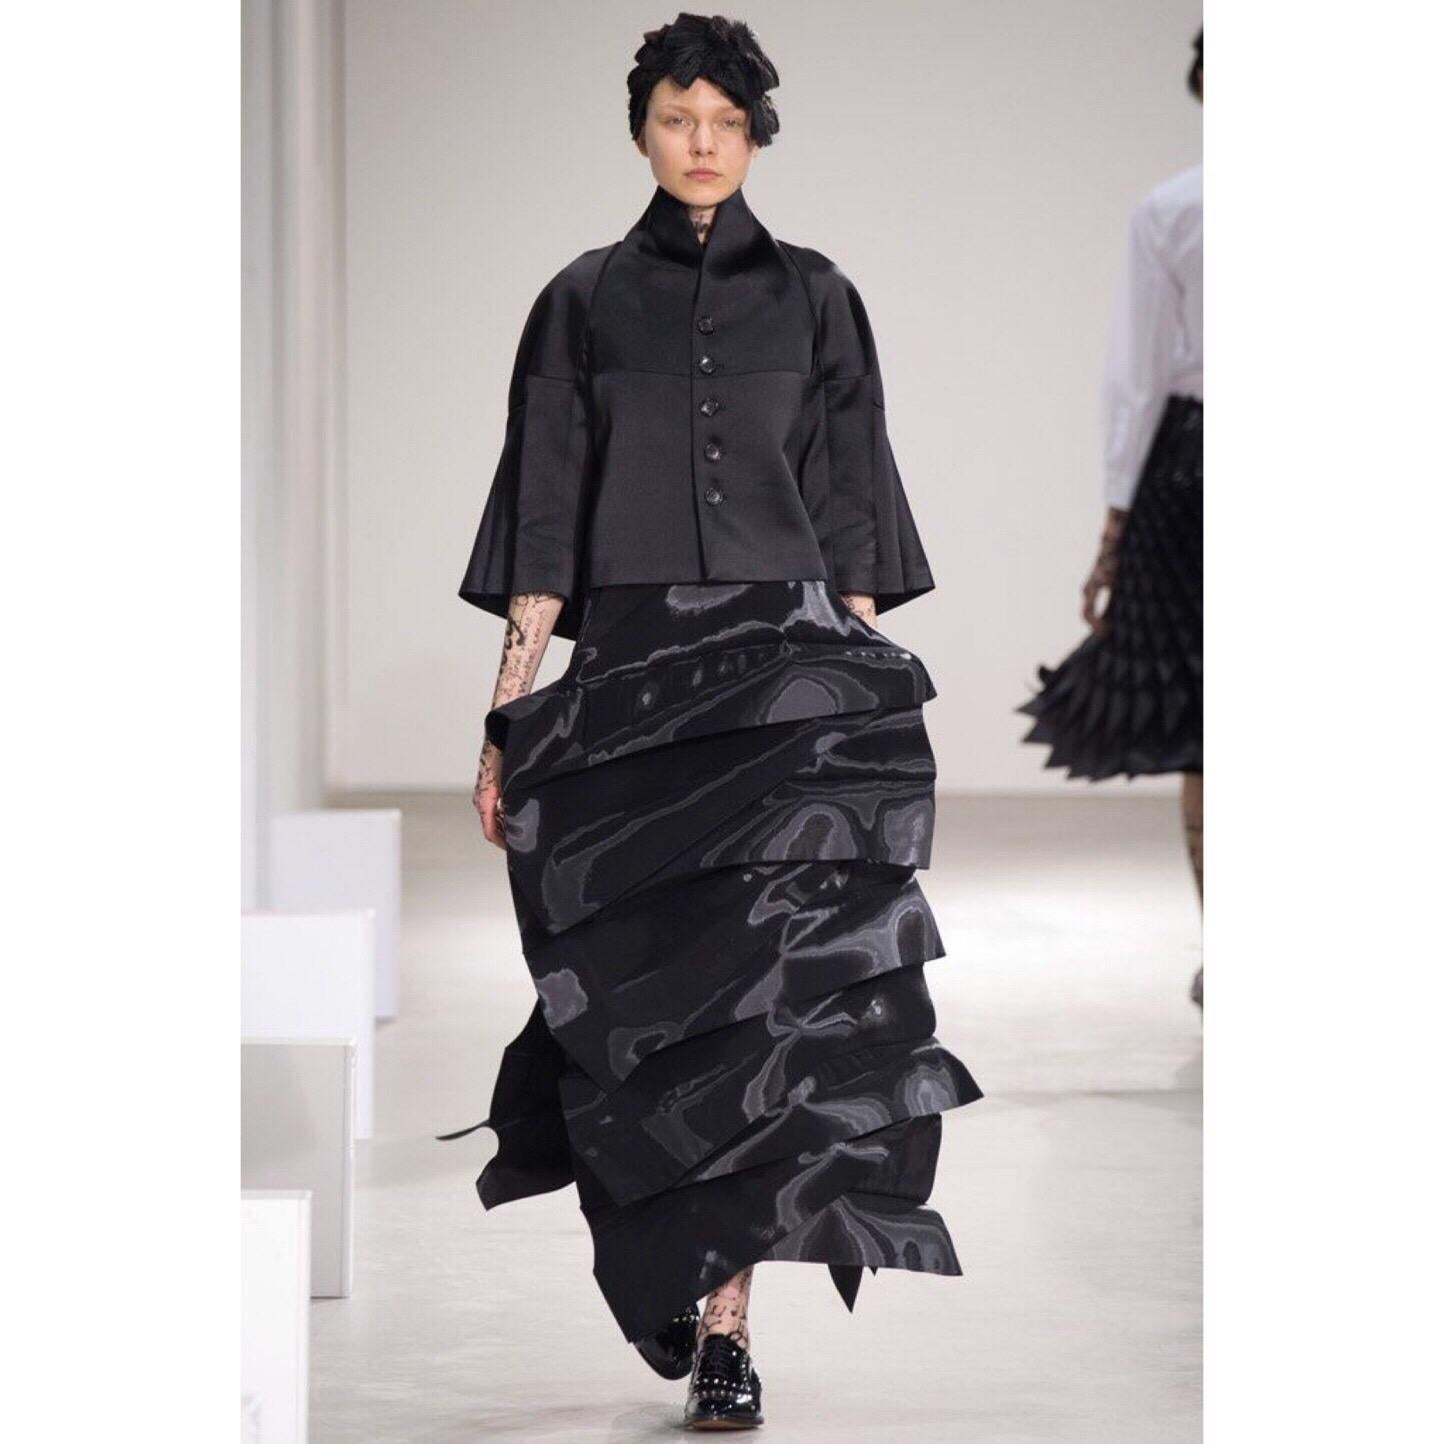 Protégé of the notorious avant-gardist Rei Kawakubo of Comme de Garçon, Junya Watanabe is a masterful designer in his own rite. Like many in the Japanese avant-garde tradition, Watanabe evokes a sense of calculated structure, geometry and volume in